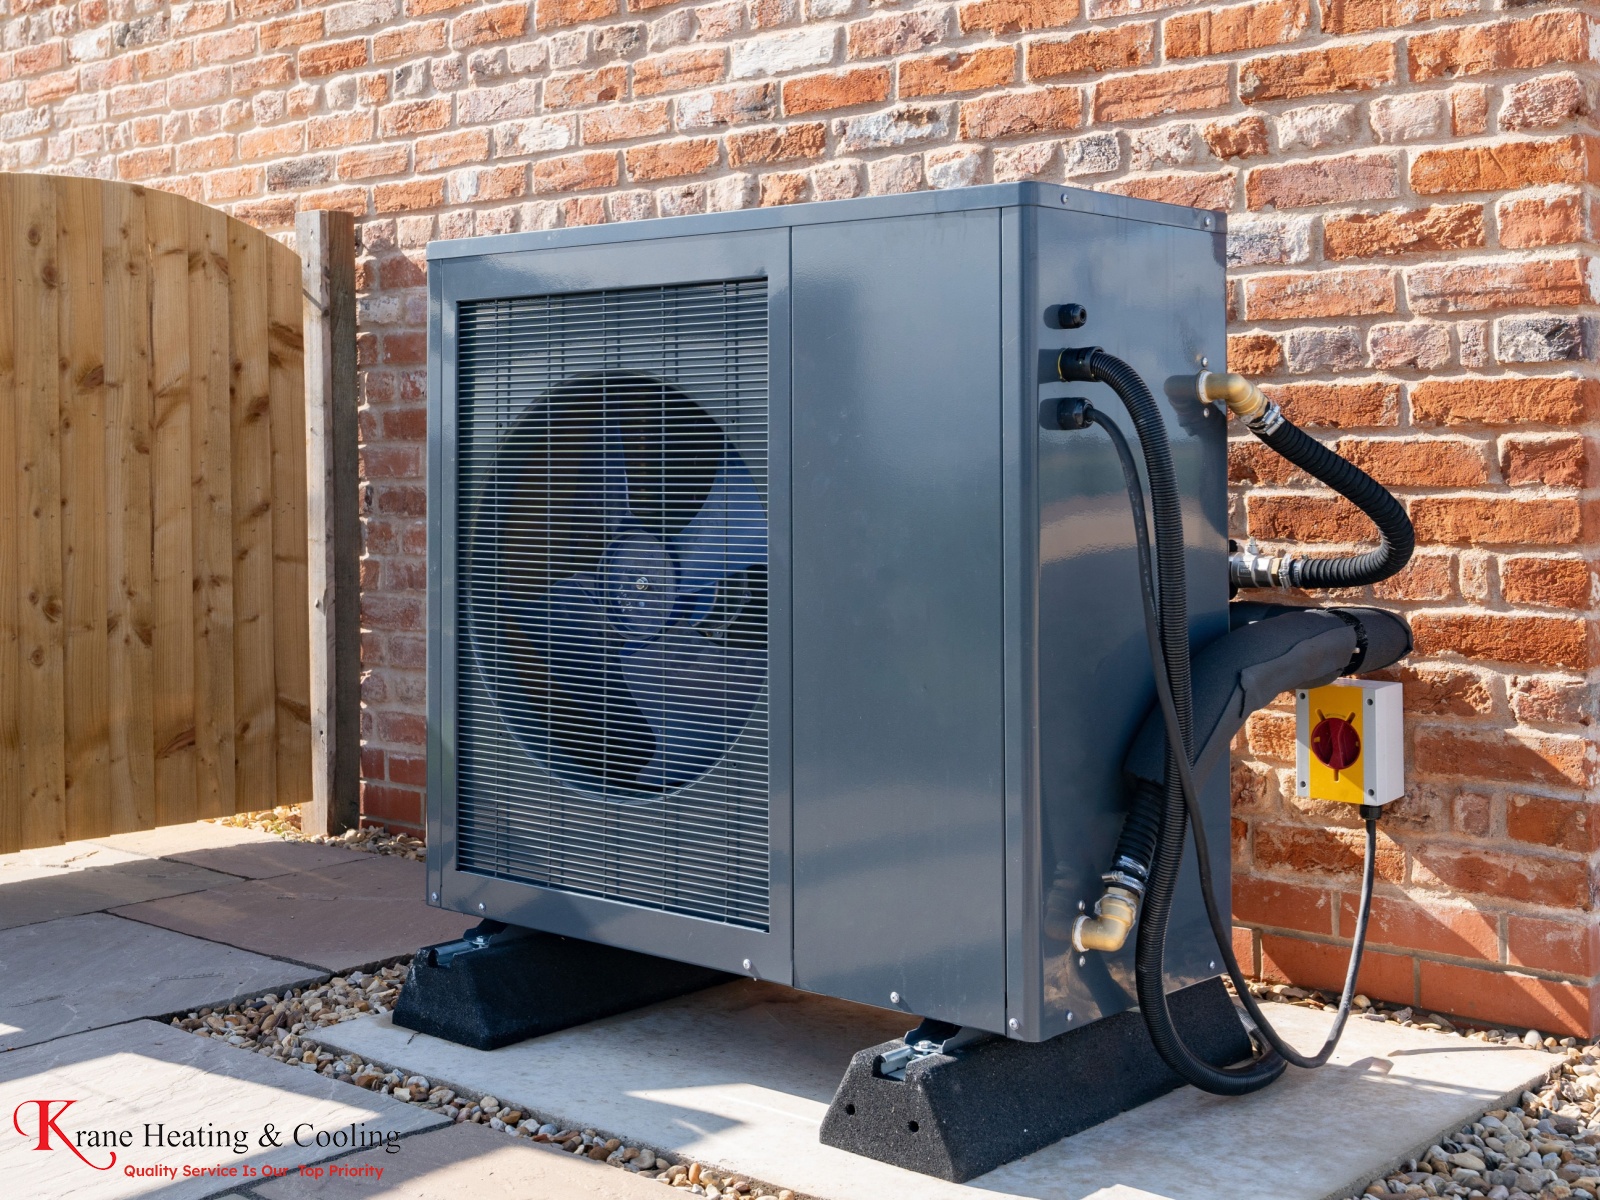 Comparing Costs: Heat Pumps and Long-Term Savings